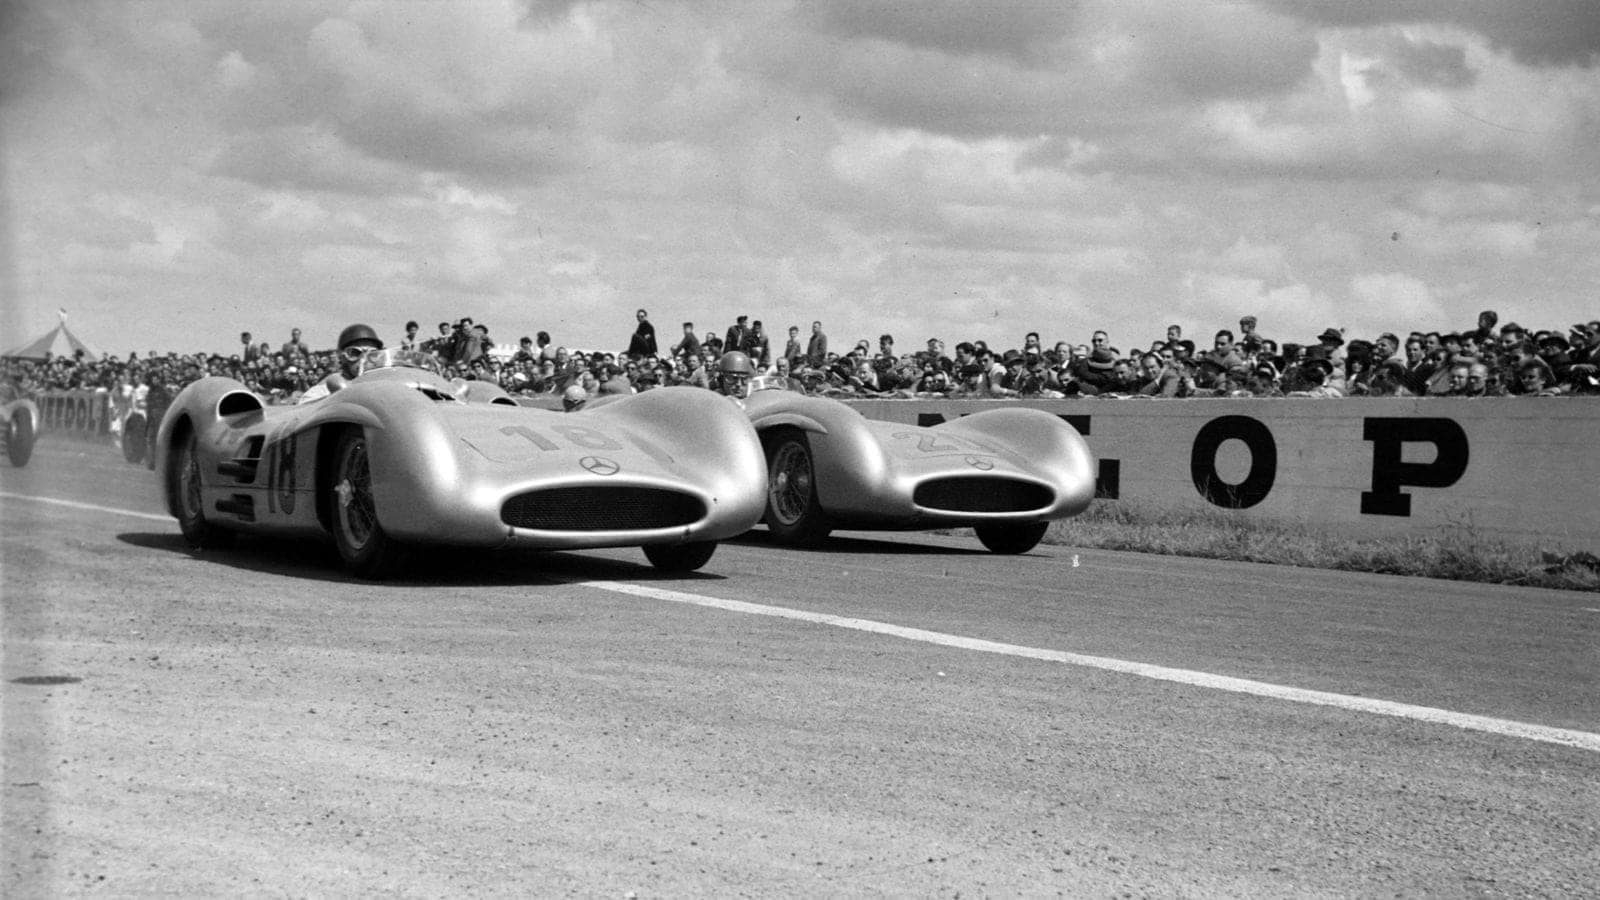 Juan Manuel Fangio, Mercedes W196, alongside Karl Kling, Mercedes W196 during the French GP at Reims-Gueux on July 04, 1954 in Reims-Gueux, France